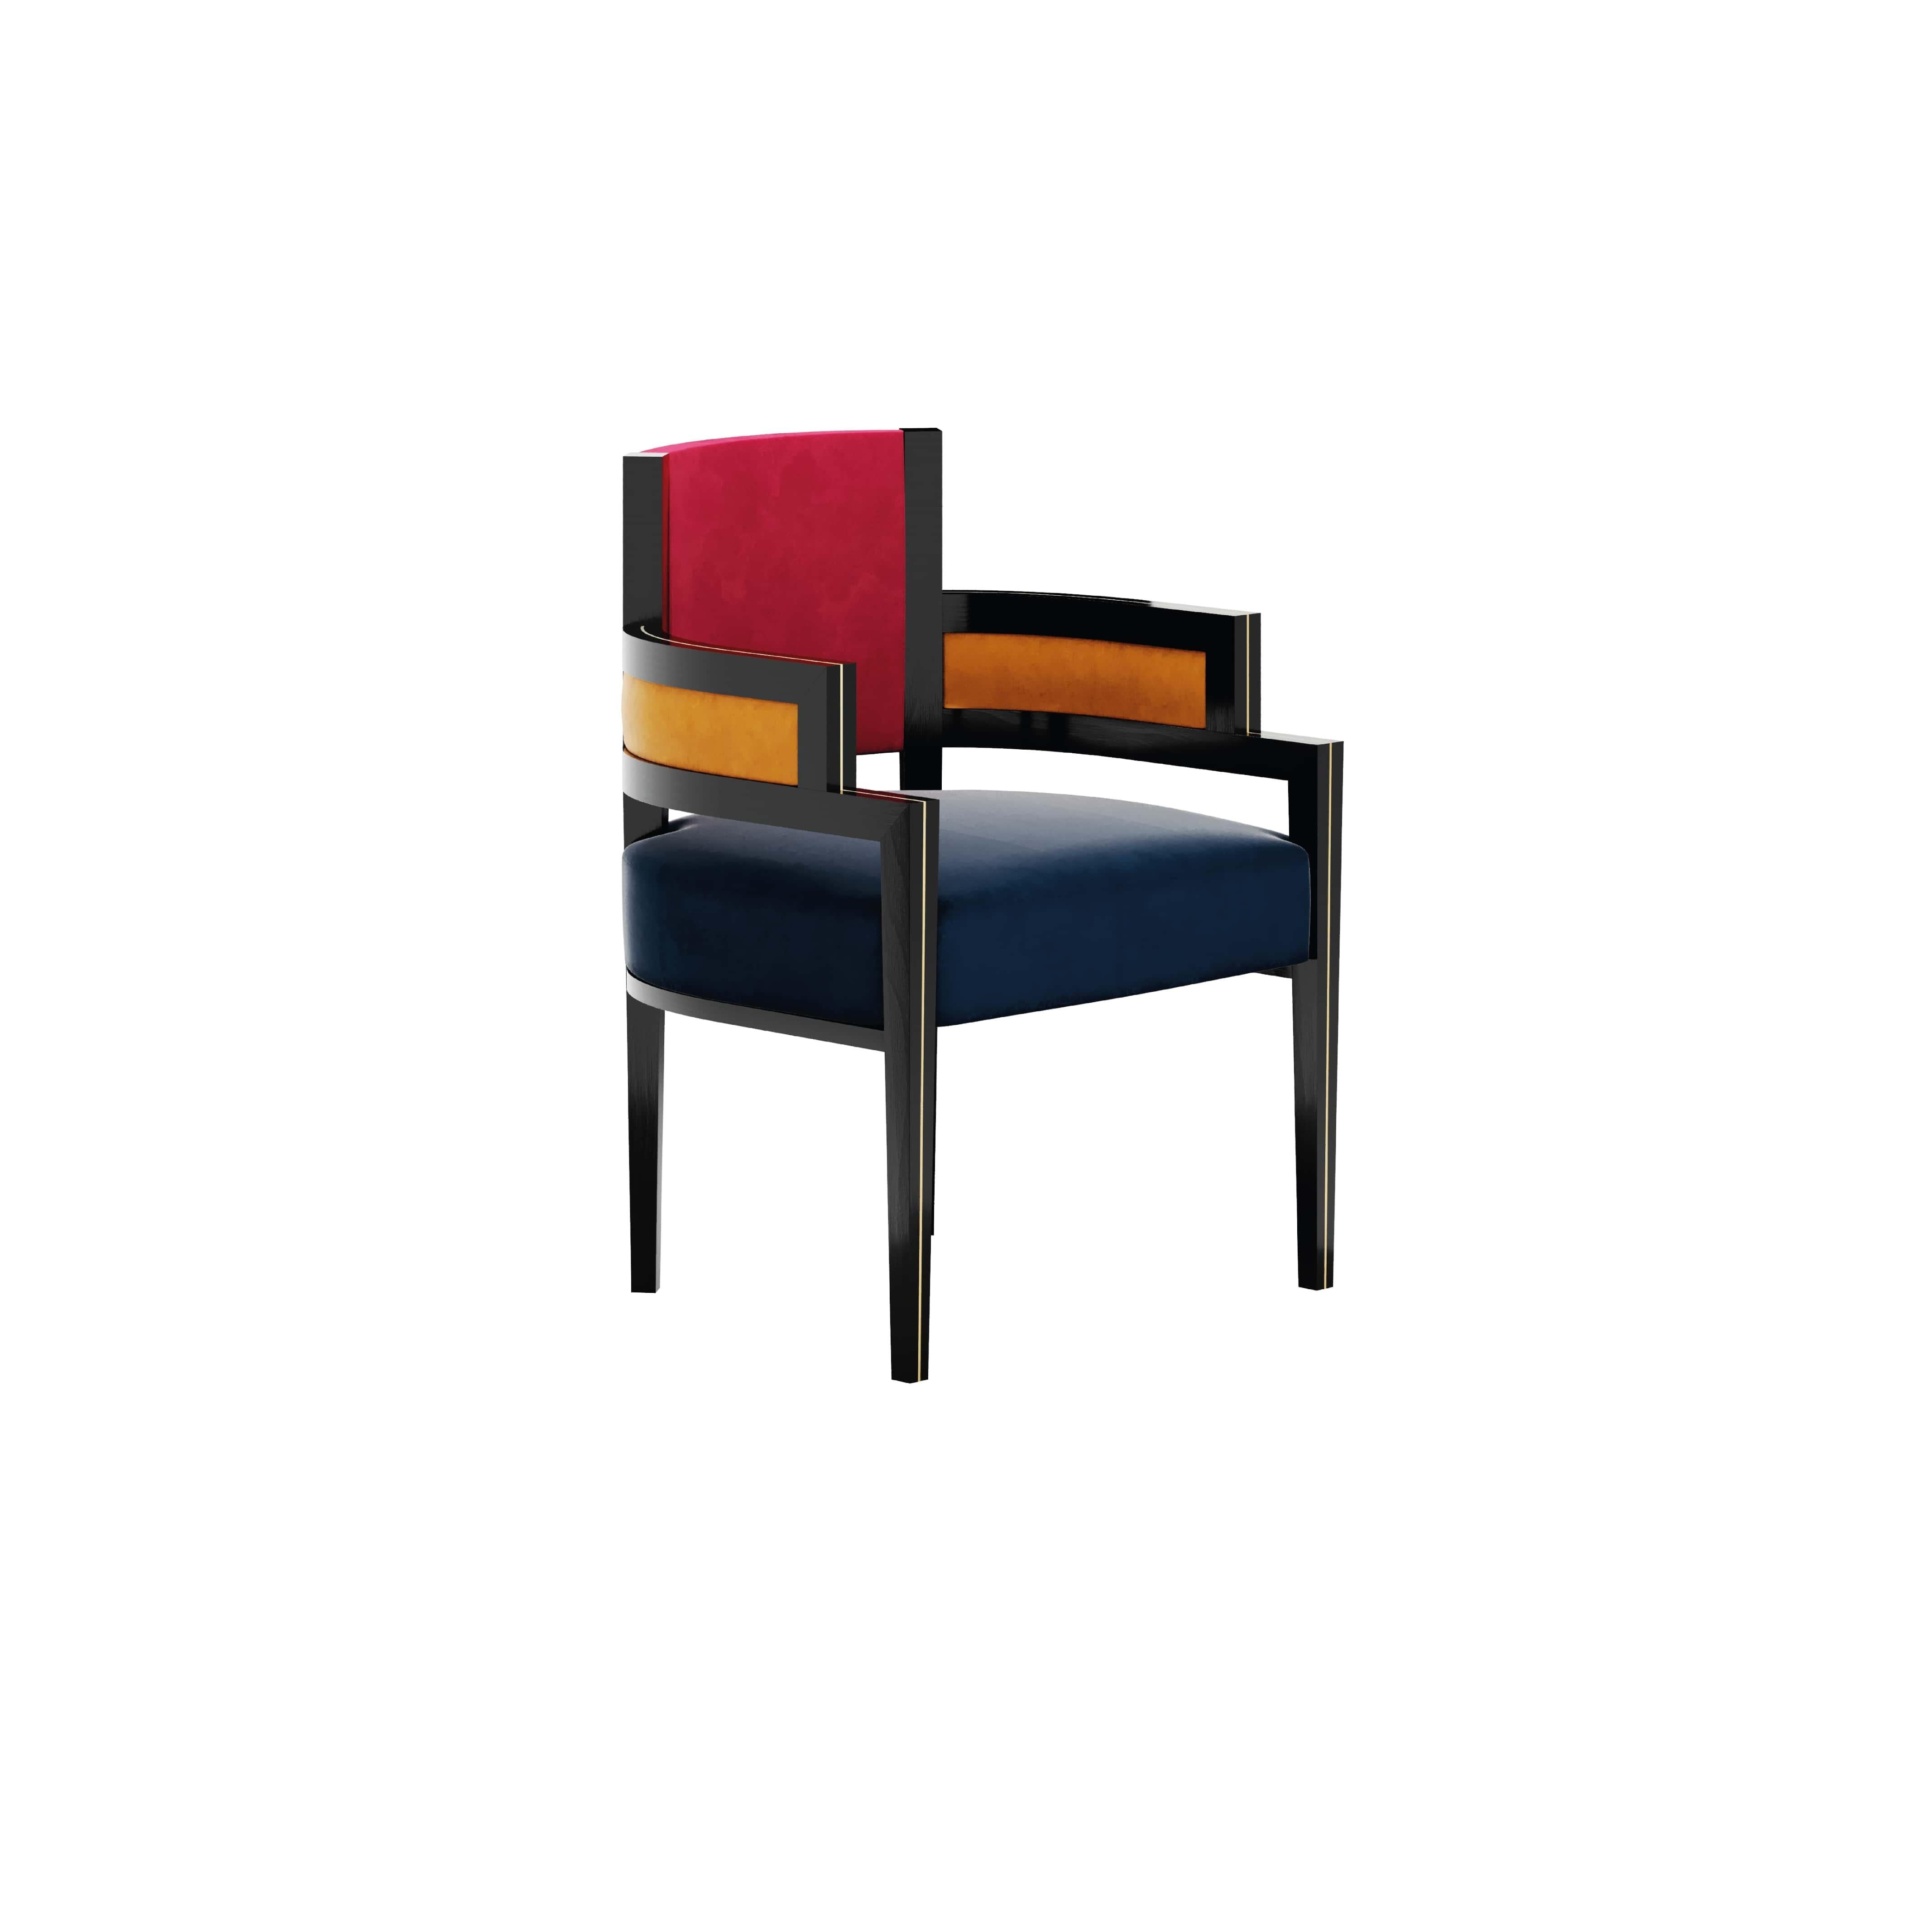 Pina chair mondrian is a high-end chair upholstered in red, blue, and yellow.
This simple yet sophisticated chair, Pina vhair mondrian, is a brilliant tribute to one of the pioneers of abstract expressionis, Piet Mondrian. The streamlined structure